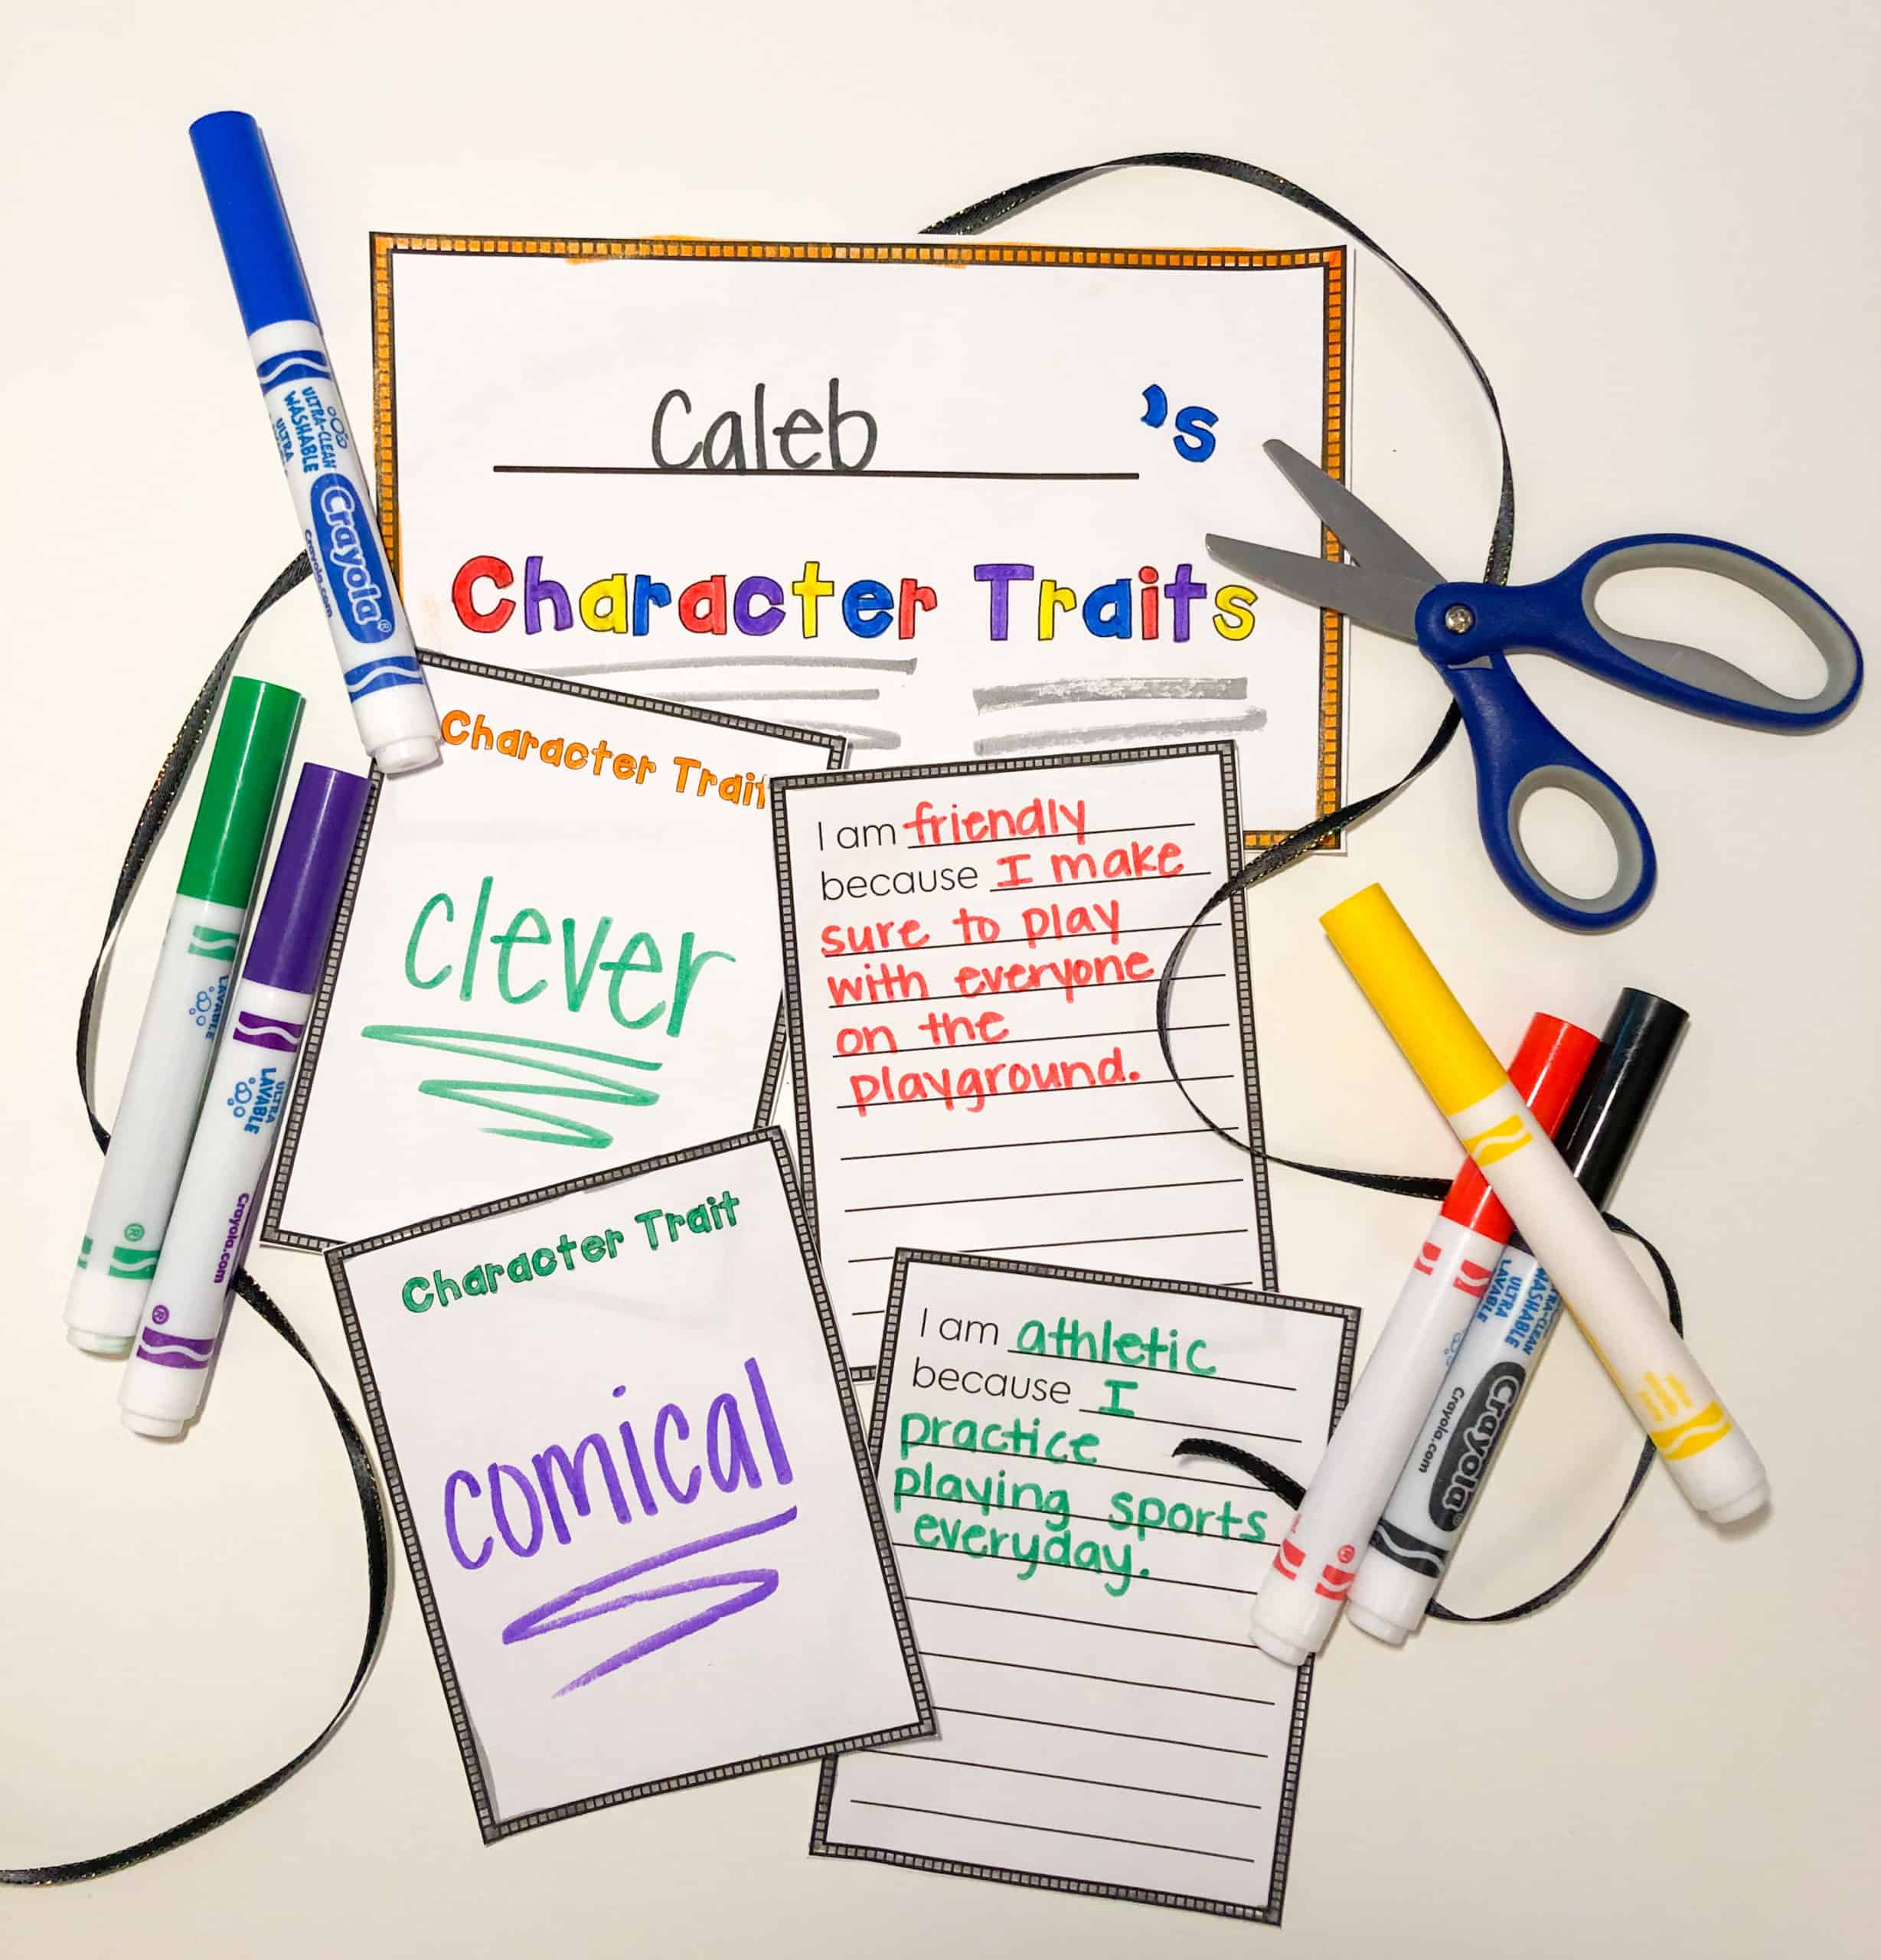 This character traits mobile freebie makes a great display for Parent Teacher Conferences or Open House